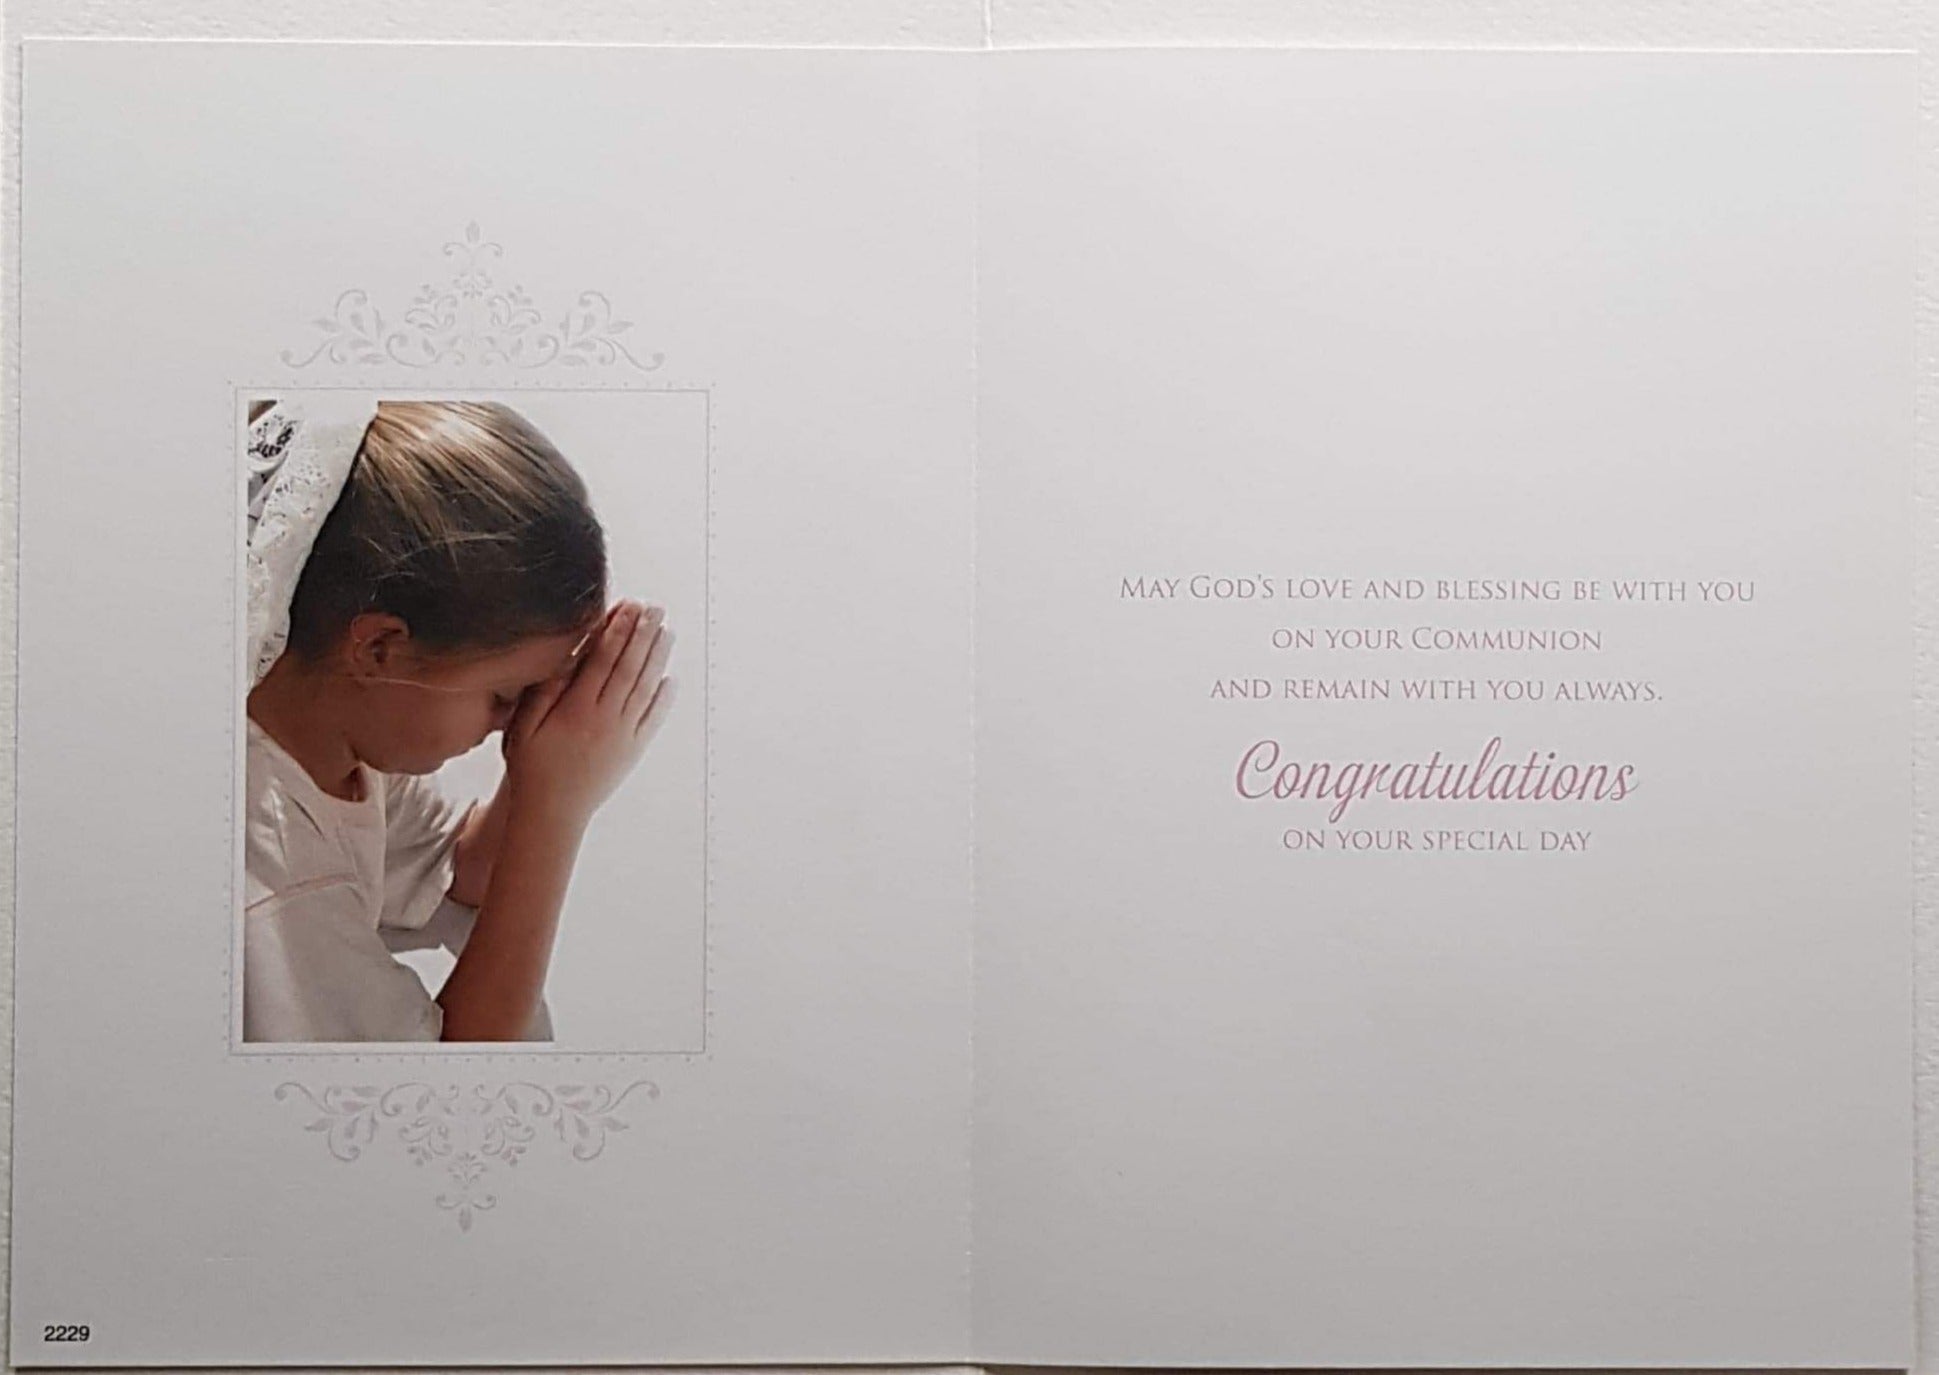 Communion Card - Girl - On Your First Communion & Girl Praying in Communion Dress